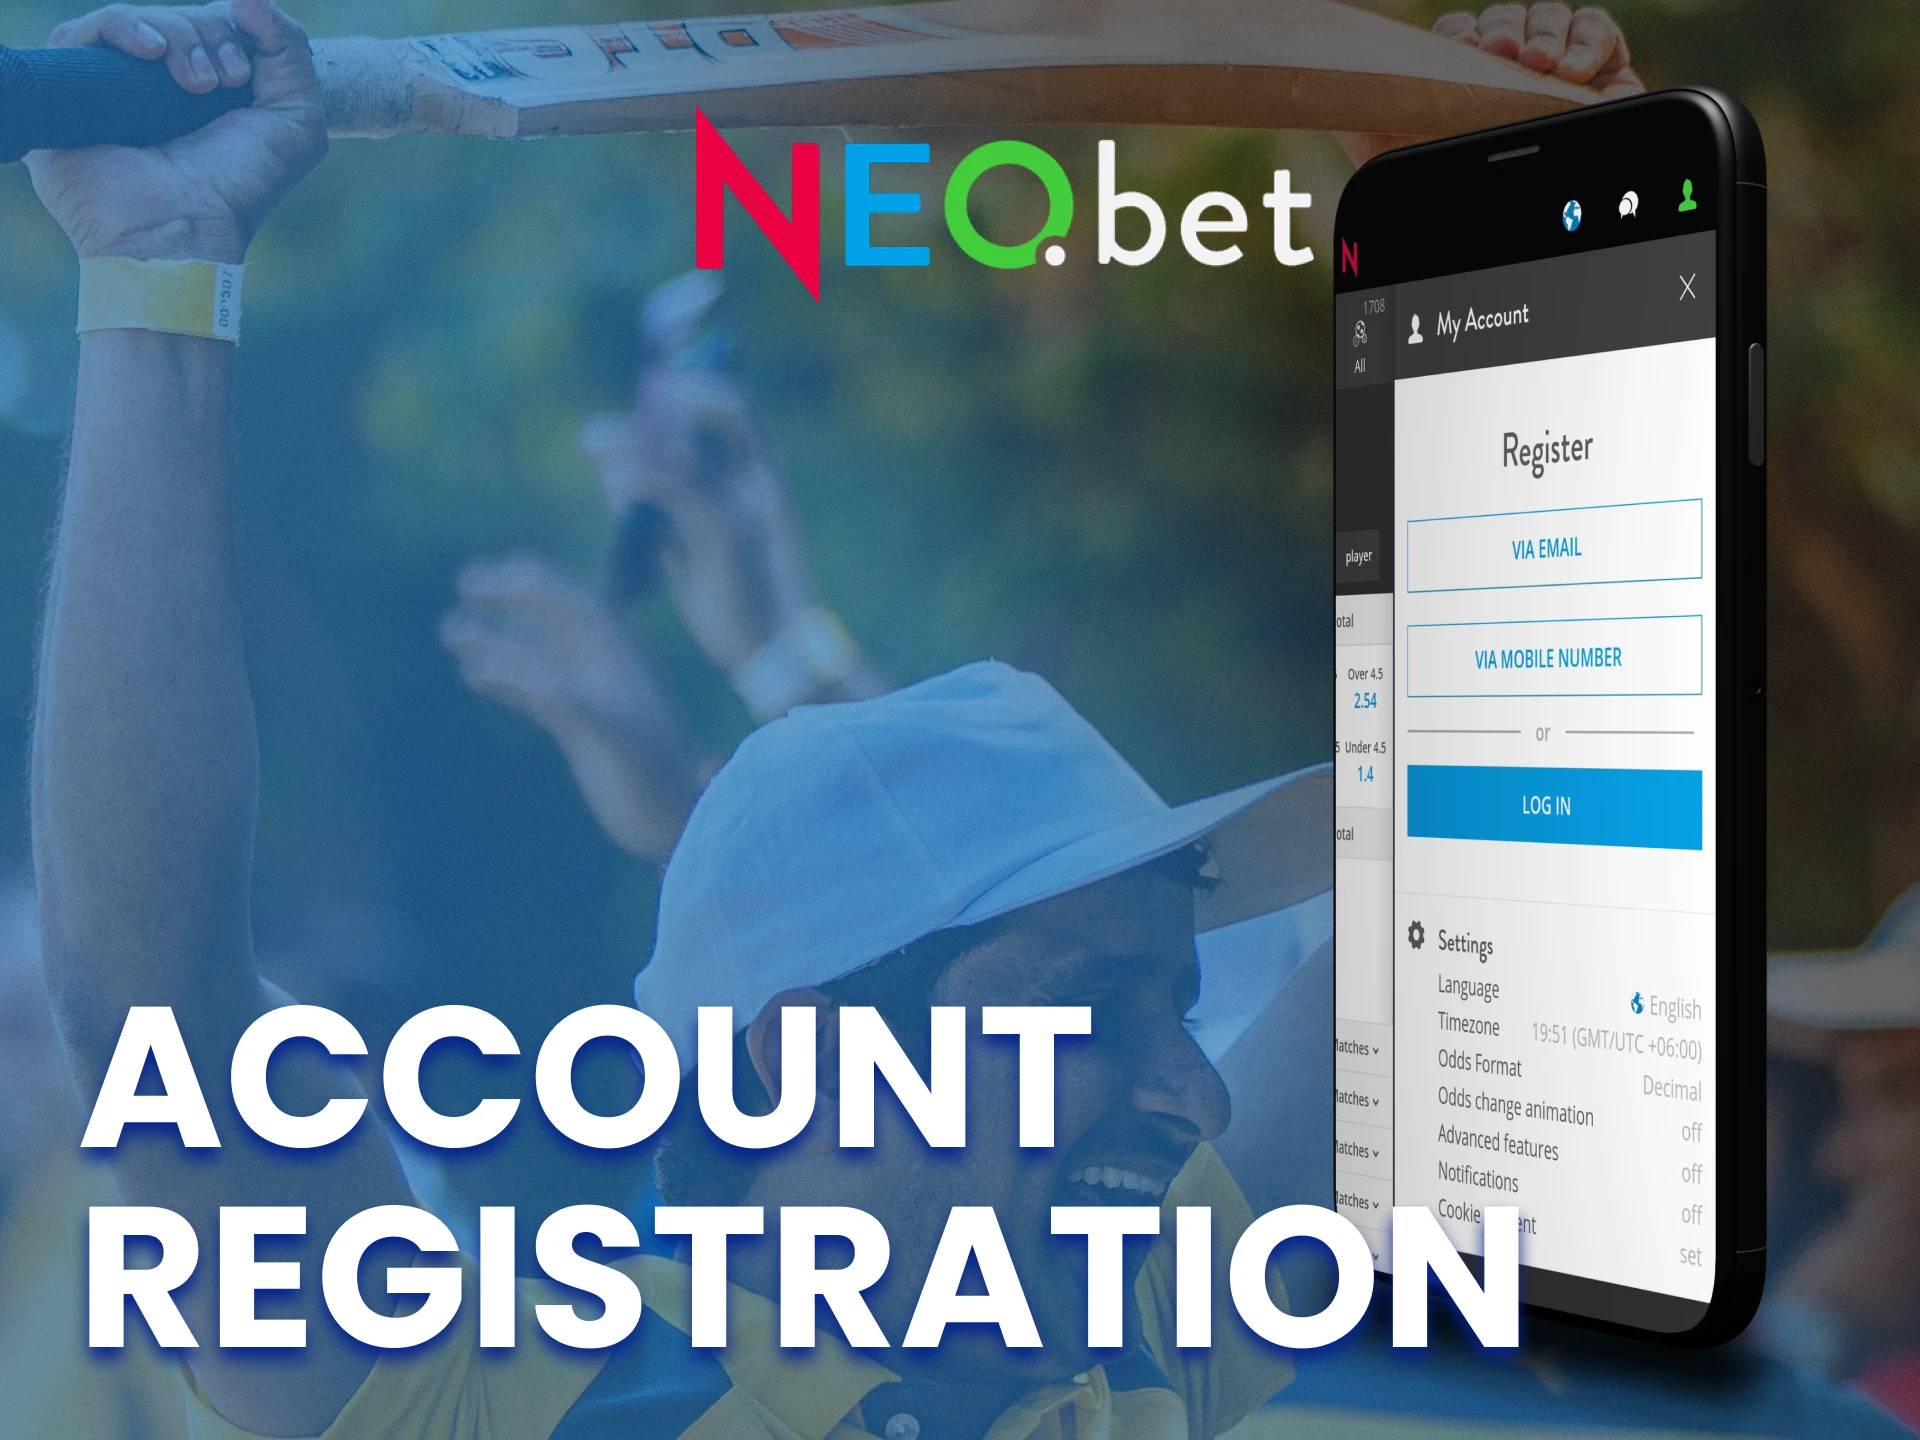 Complete a simple registration in the NEO.bet app.